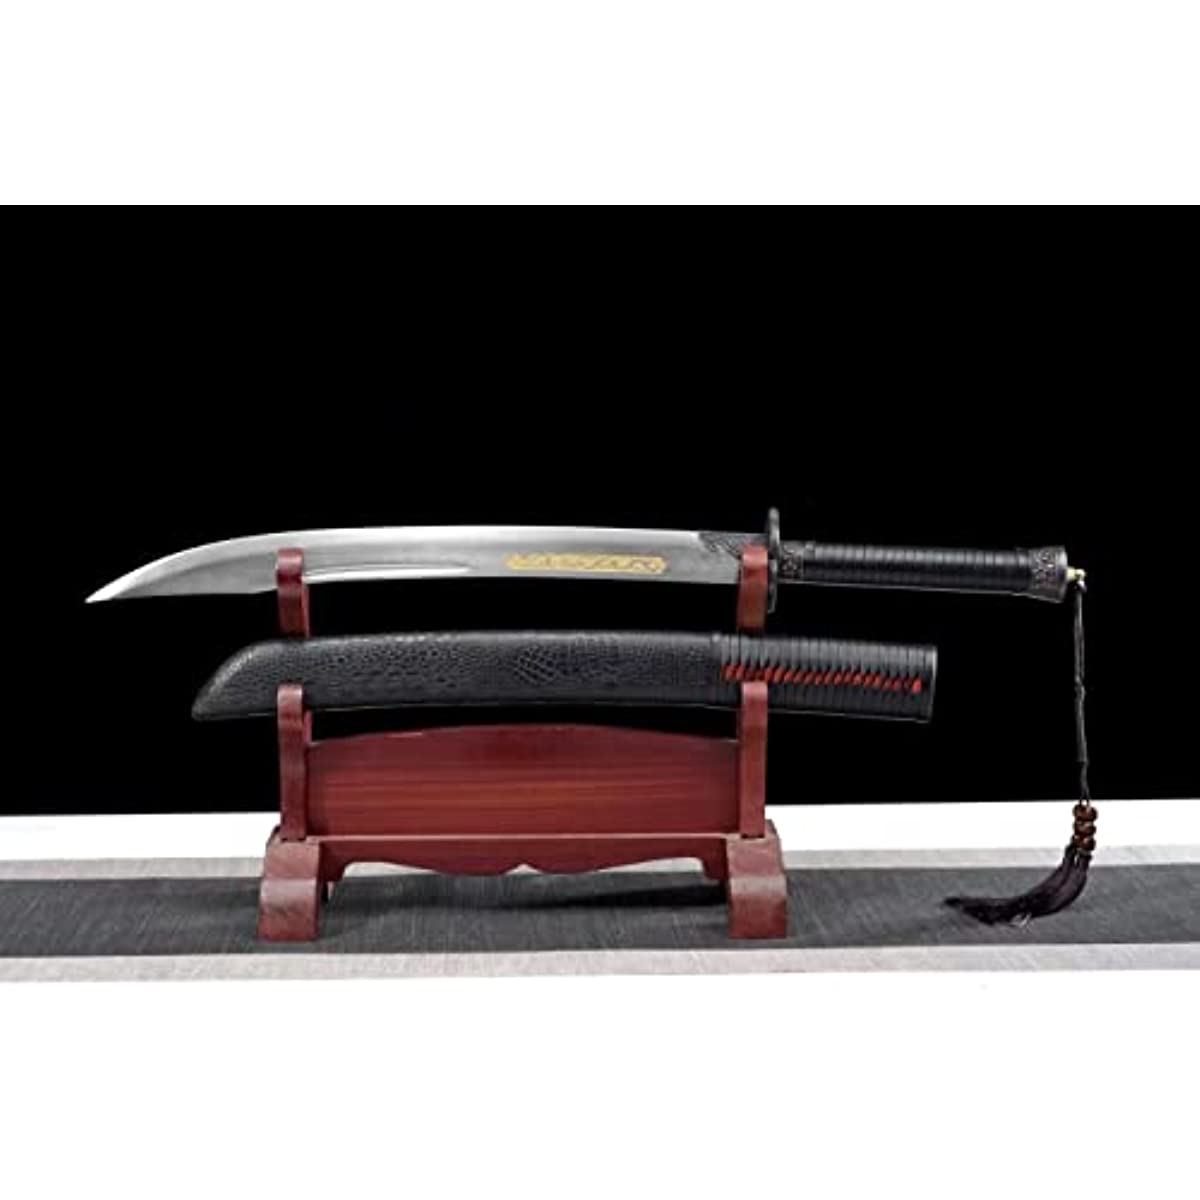 LOONGSWORD,Dagger Saber Forged High Carbon Steel Blade,Pu Scabbard) Length 31"